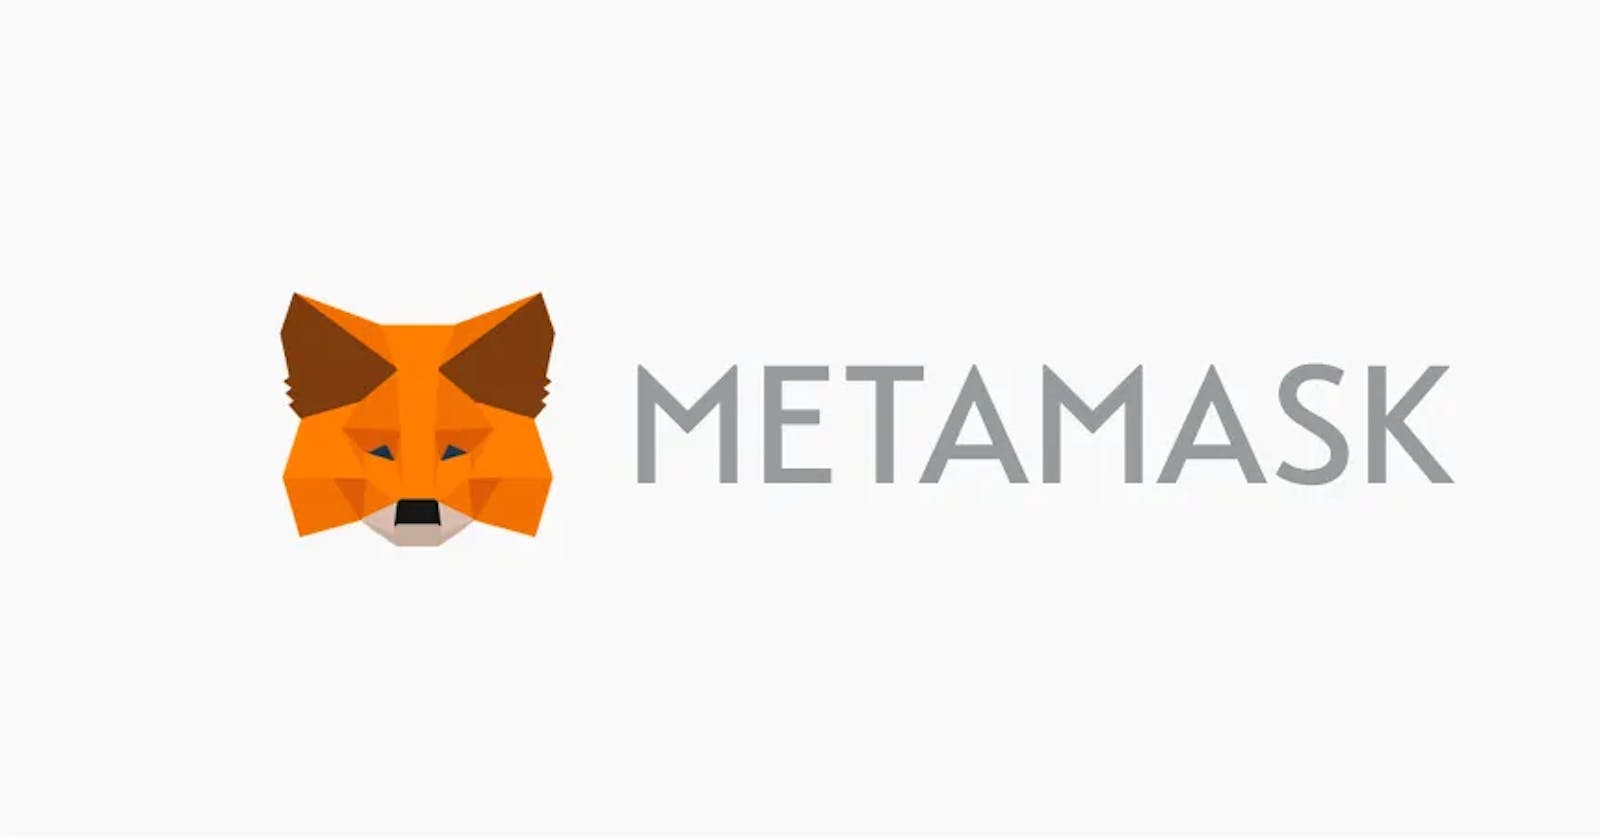 How to Get Started with MetaMask